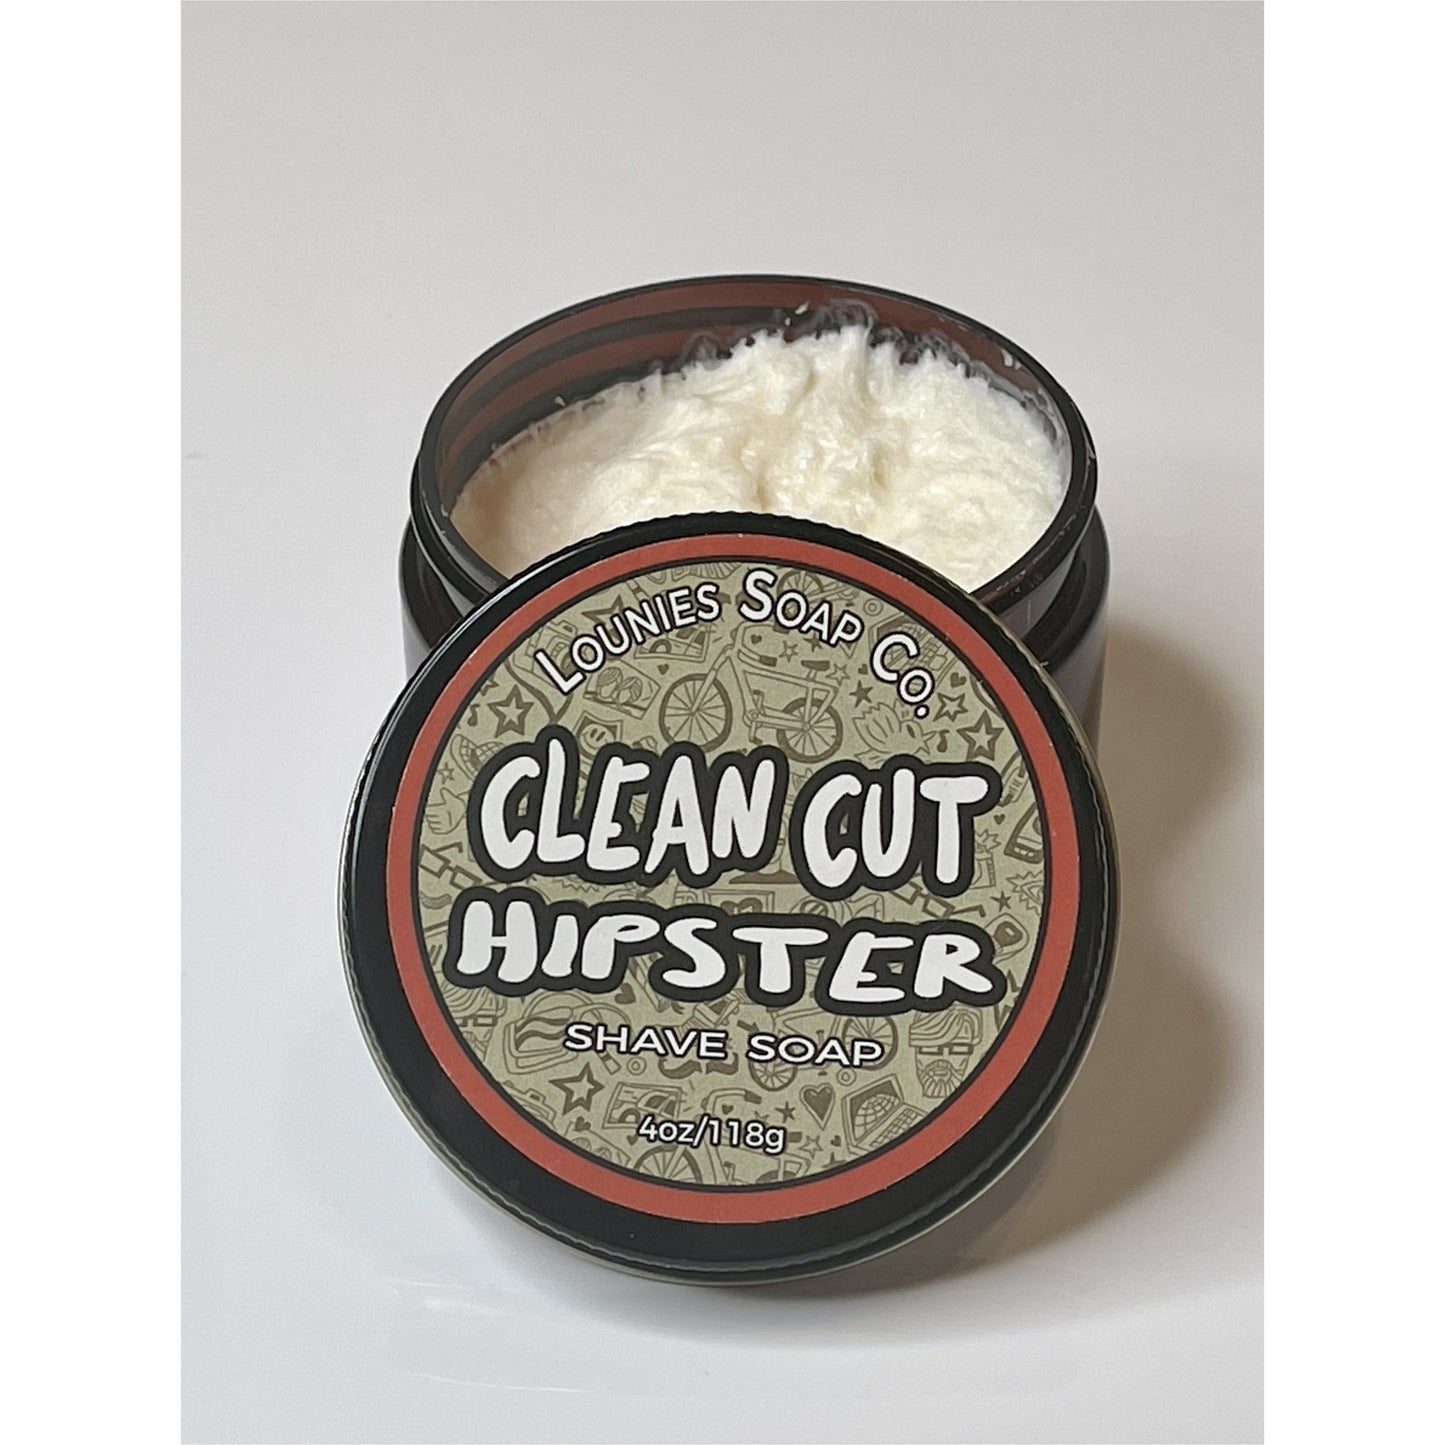 Clean Cut Hipster Shave Soap